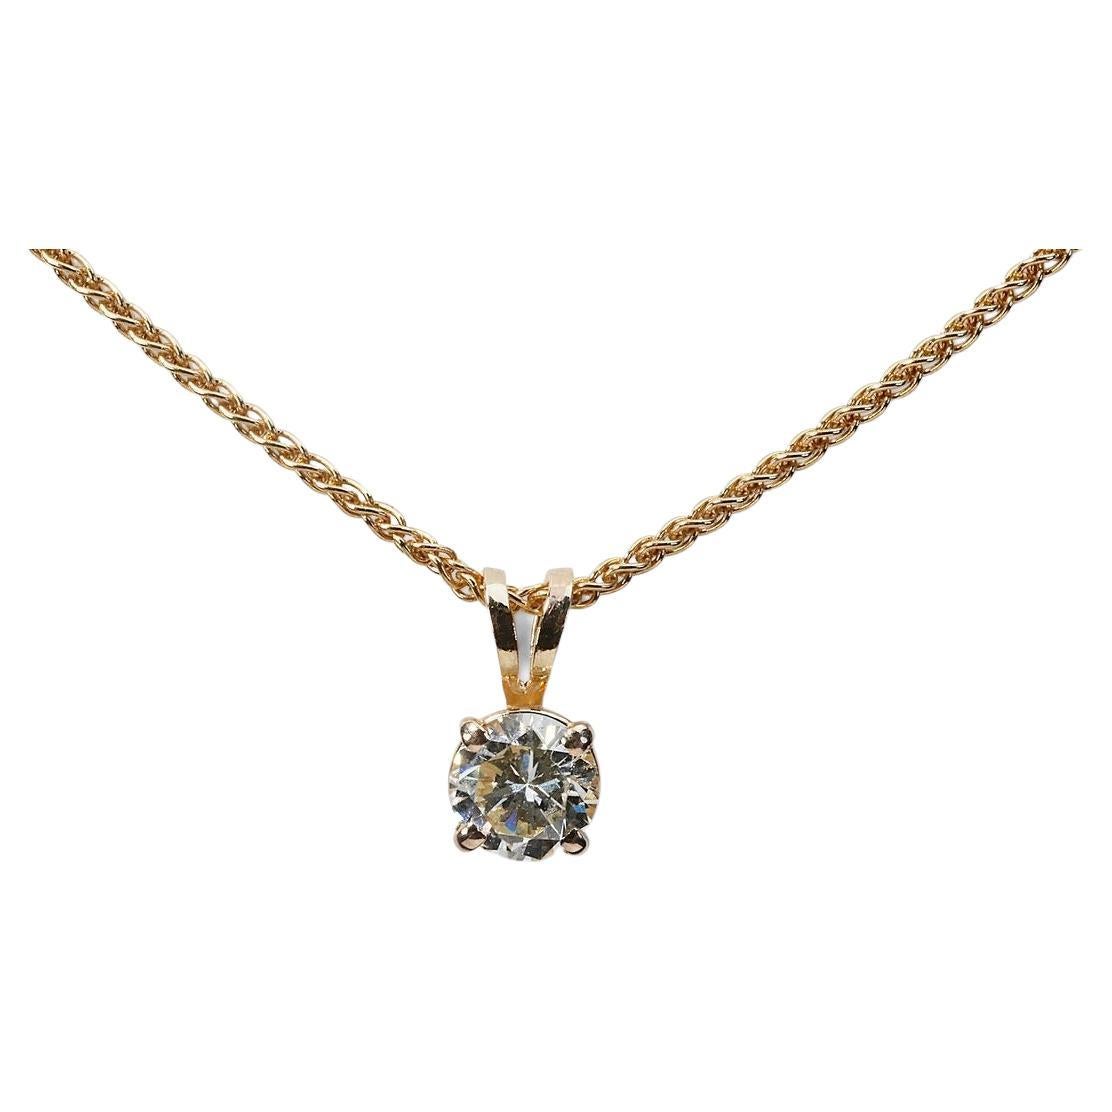 Stunning 18k Yellow Gold Solitaire Necklace w/ 0.9ct Natural Diamond GIA Cert For Sale